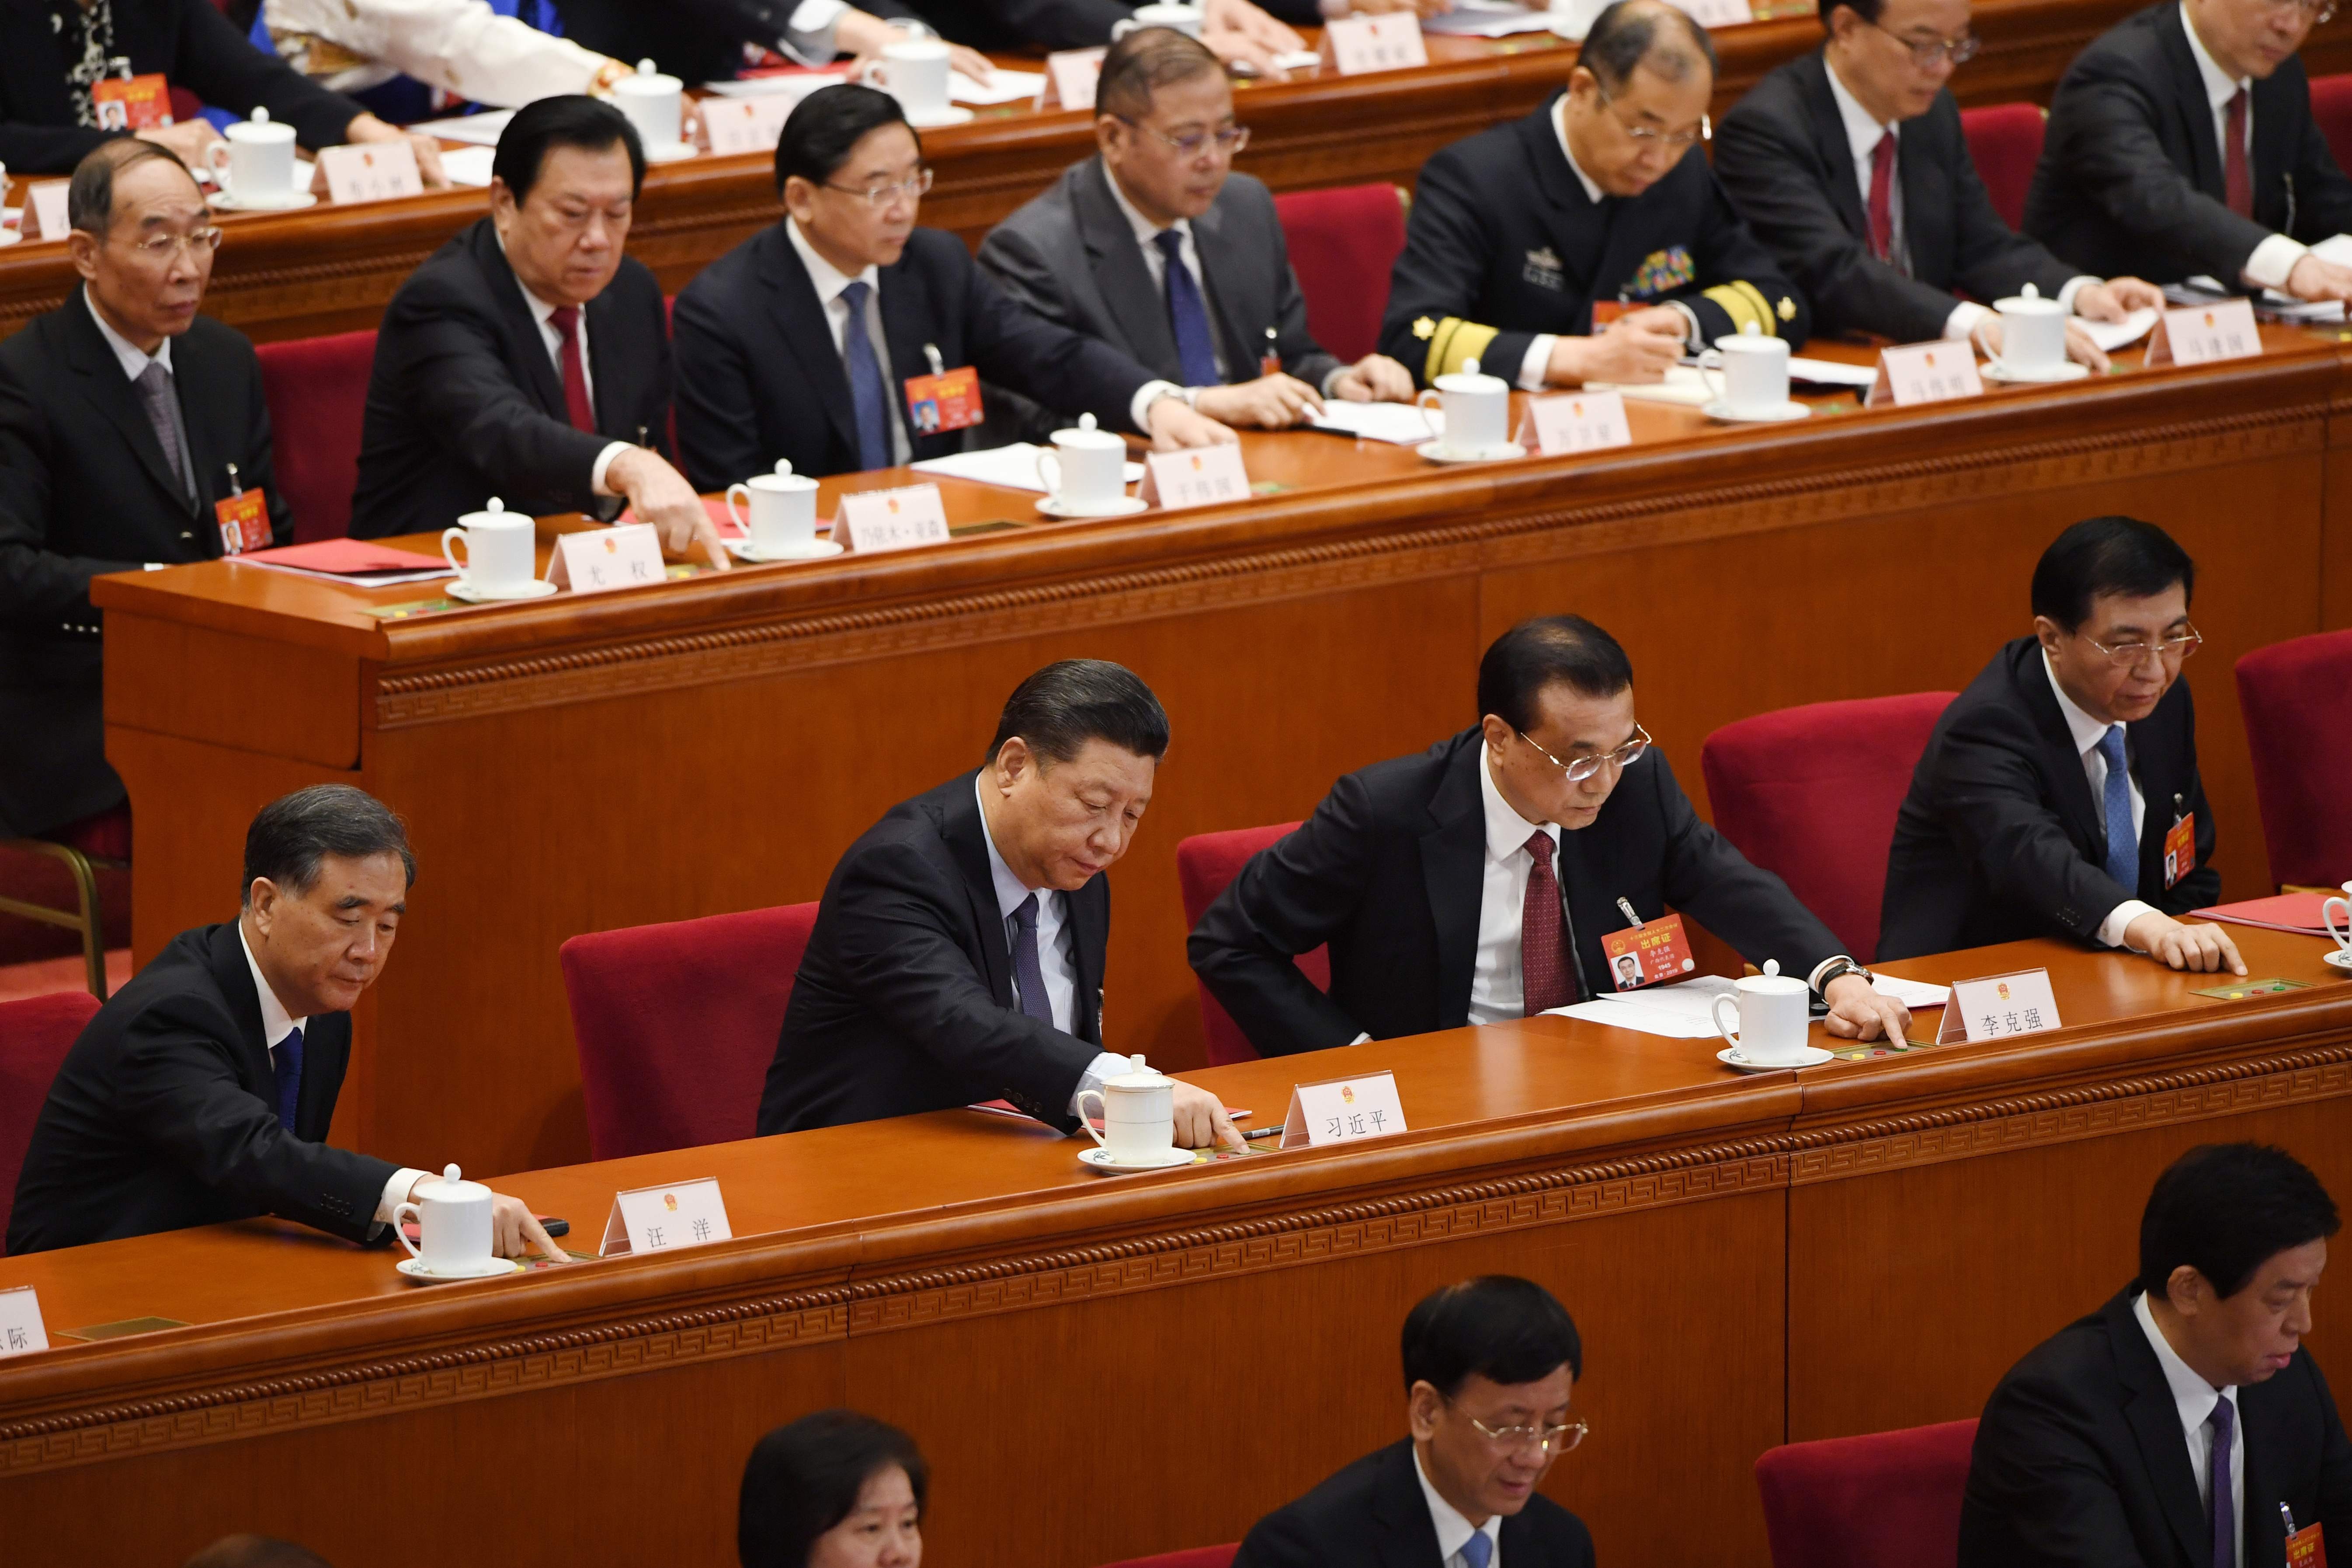 Chinese leaders, including President Xi Jinping and Premier Li Keqiang (centre), approving the fast-tracked Foreign Investment Law last year, possibly as an olive branch in trade talks with the US. Photo: AFP